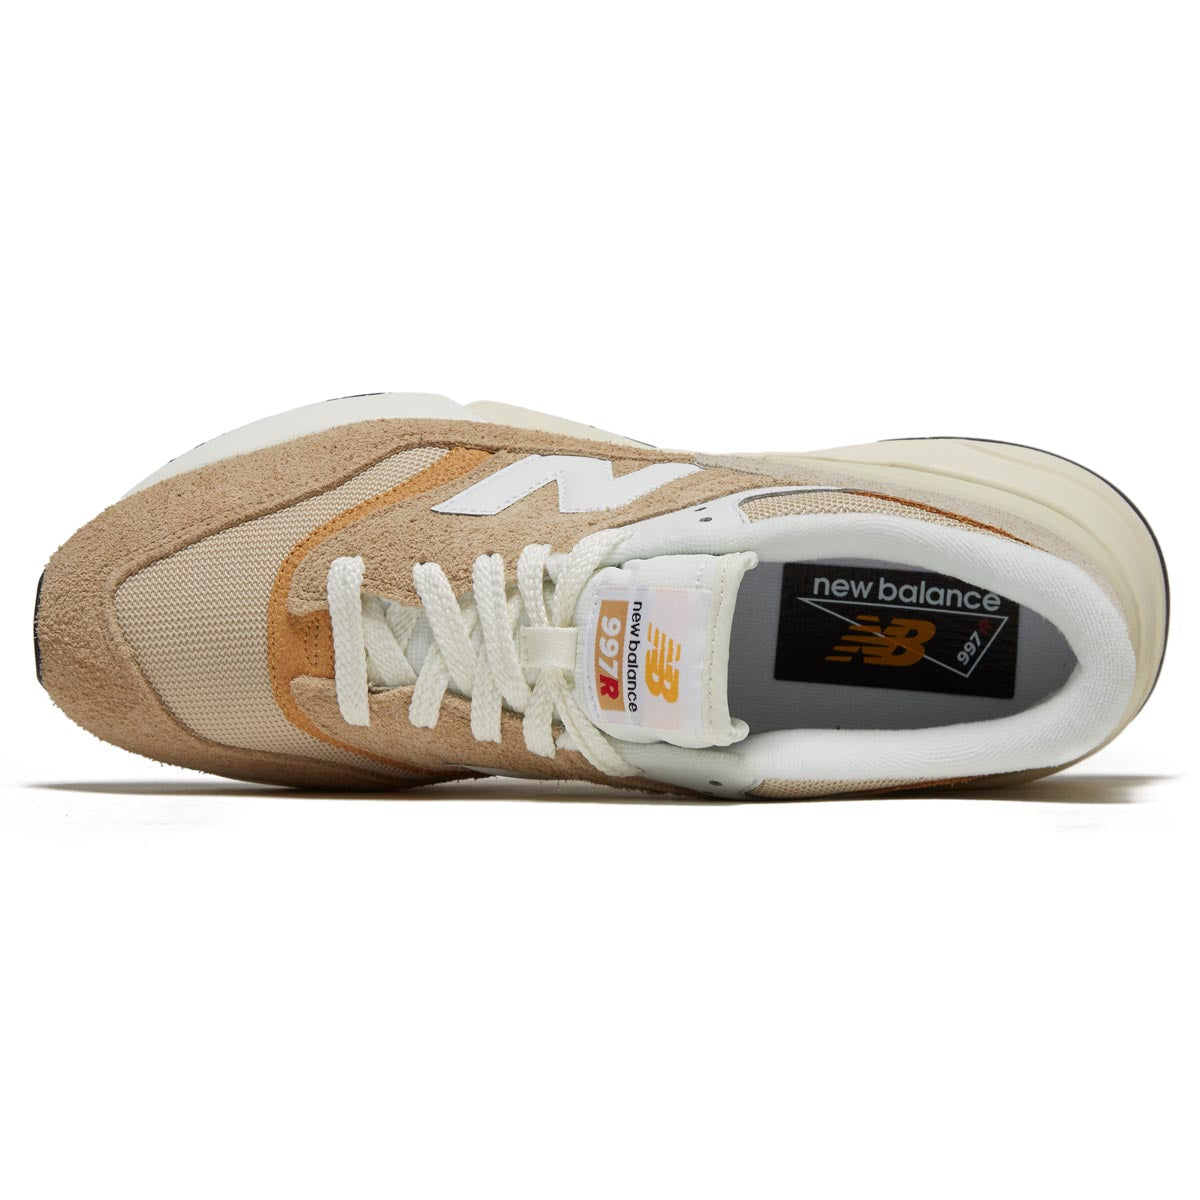 New Balance 997R Shoes - Dolce image 3